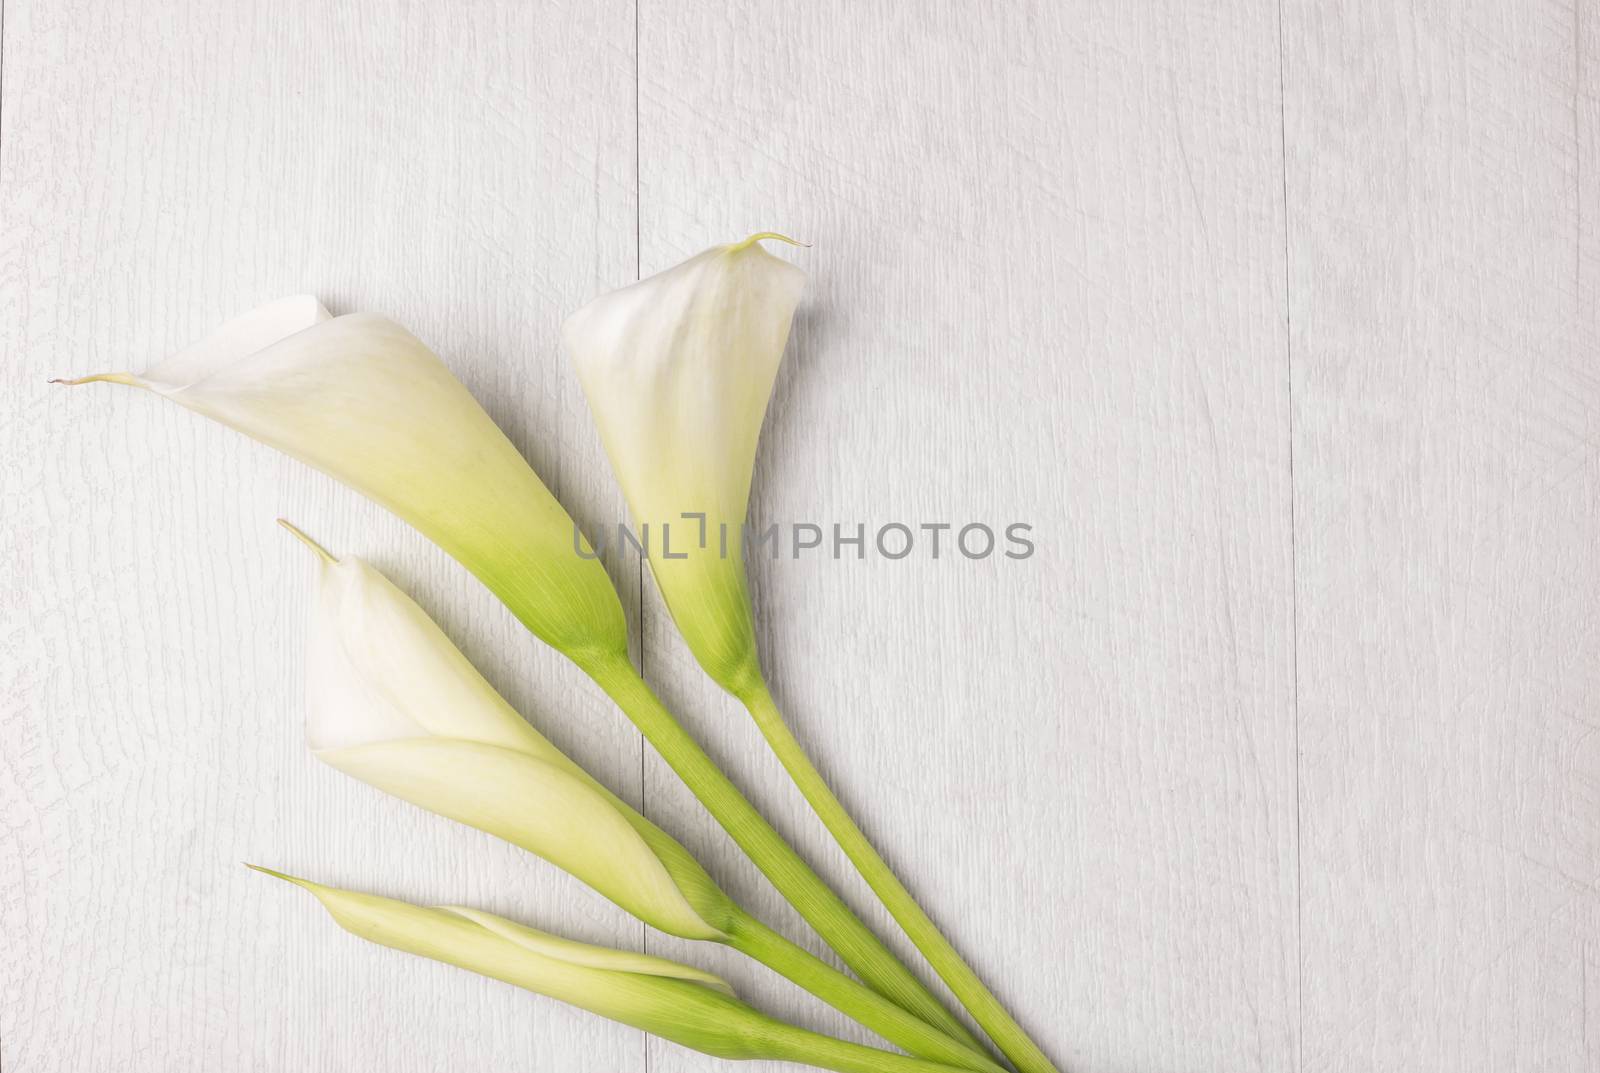 Elegant spring flower, calla lily by AnaMarques